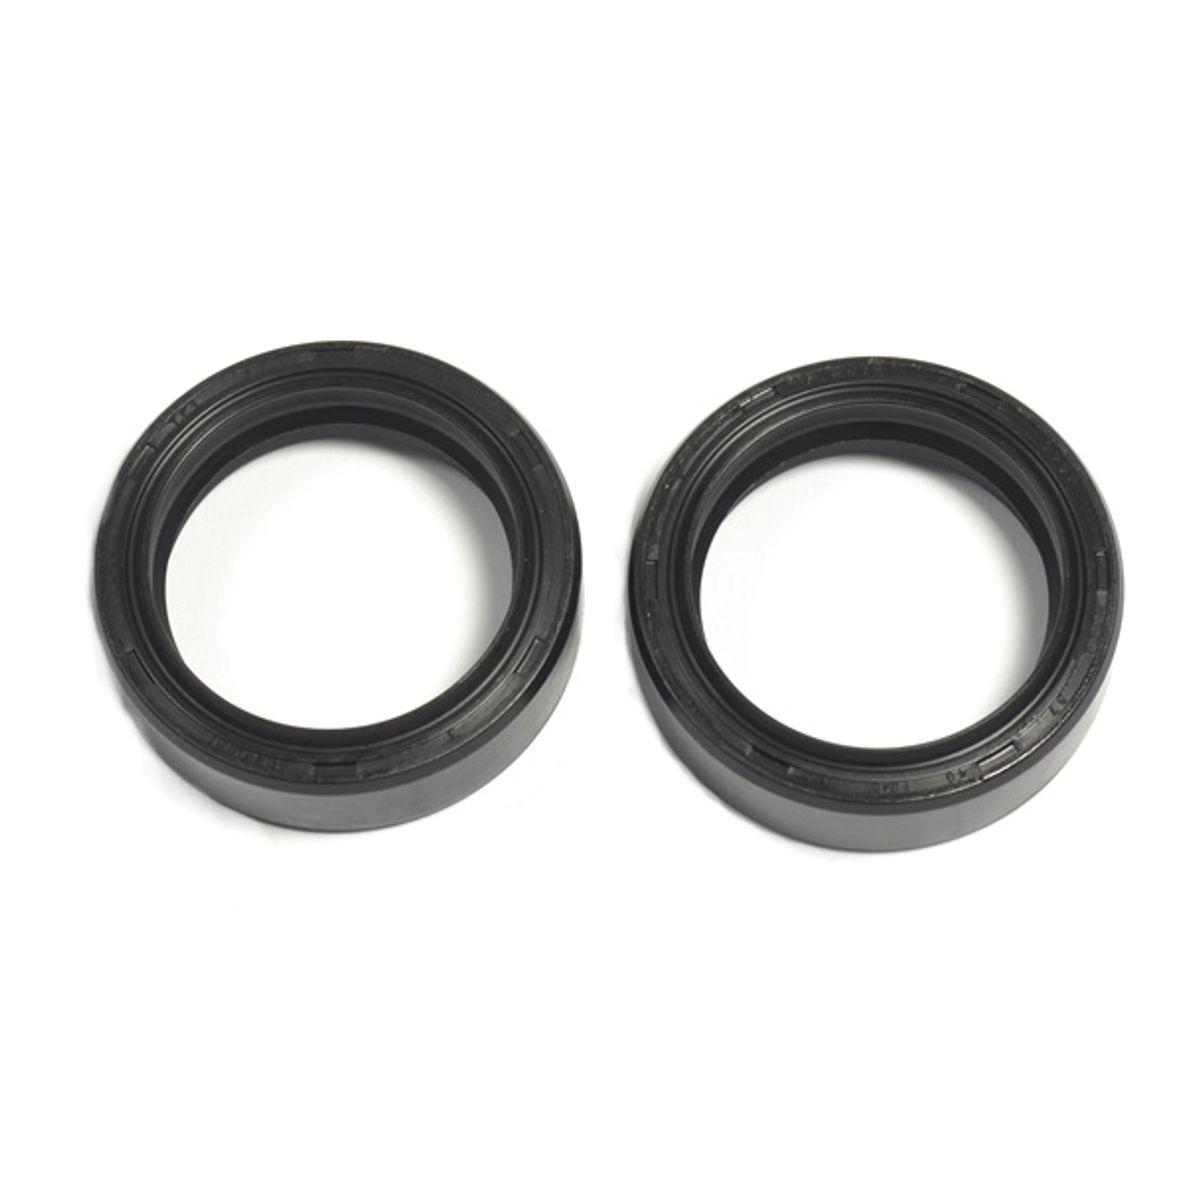 Fork Oil Seal Kit 37x48x12.5/13.5 mm - For 79-80 Honda CR125 & 75-79 GL1000 Gold Wing - Click Image to Close